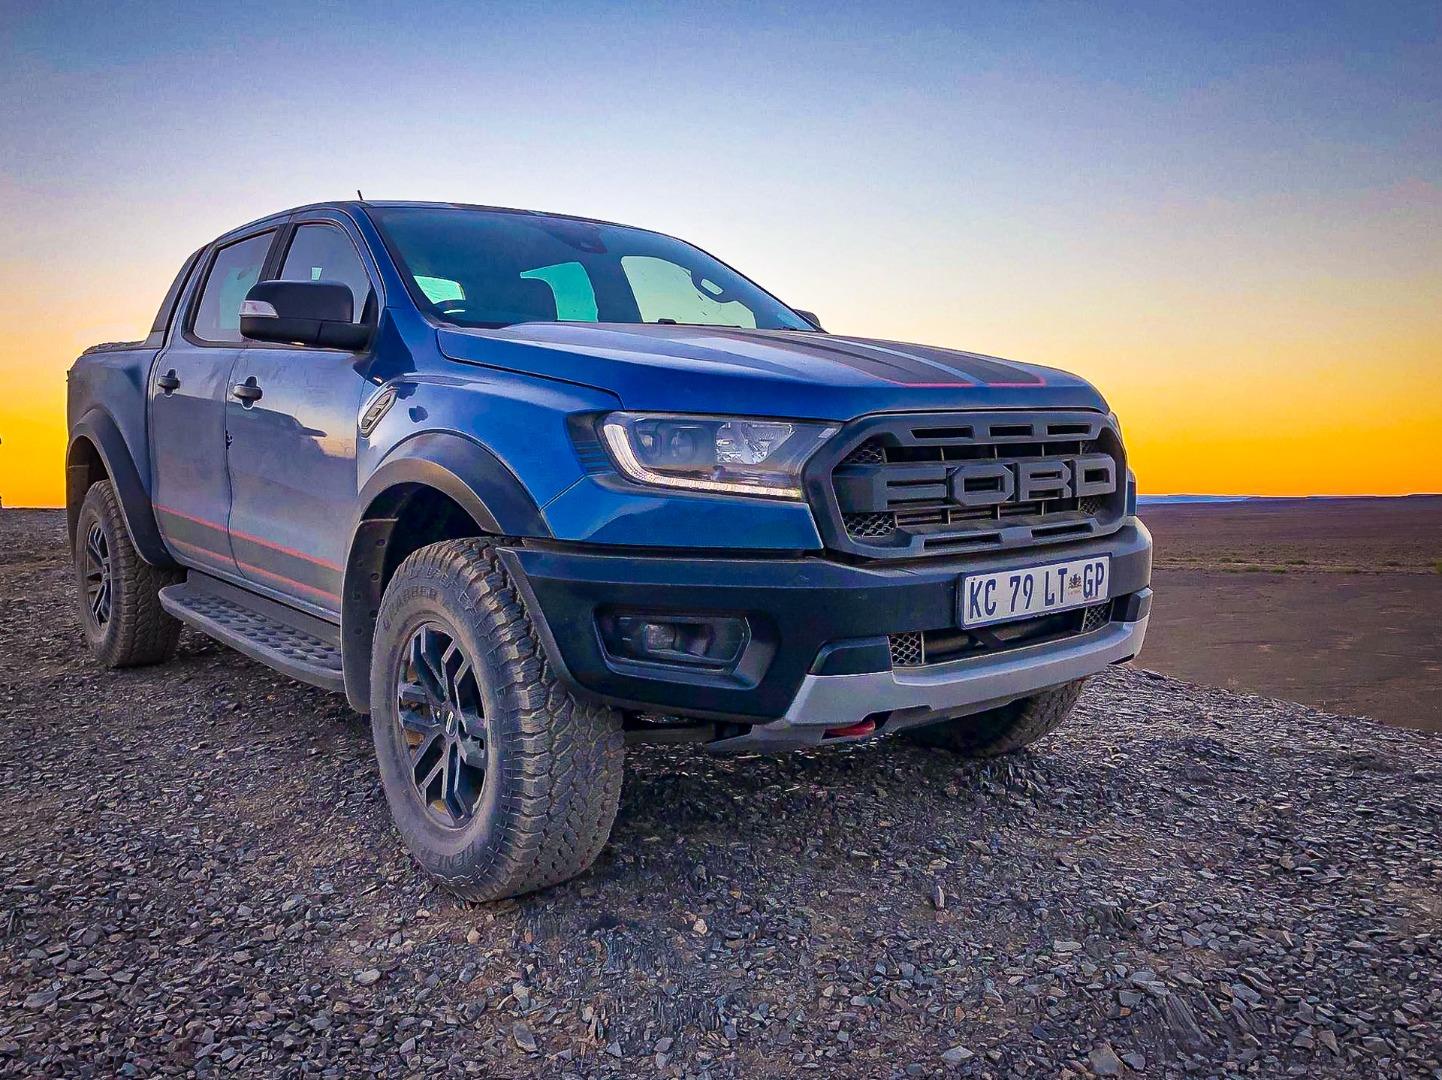 Ford Ranger Raptor SE (2021) - A fitting farewell for the locally-built